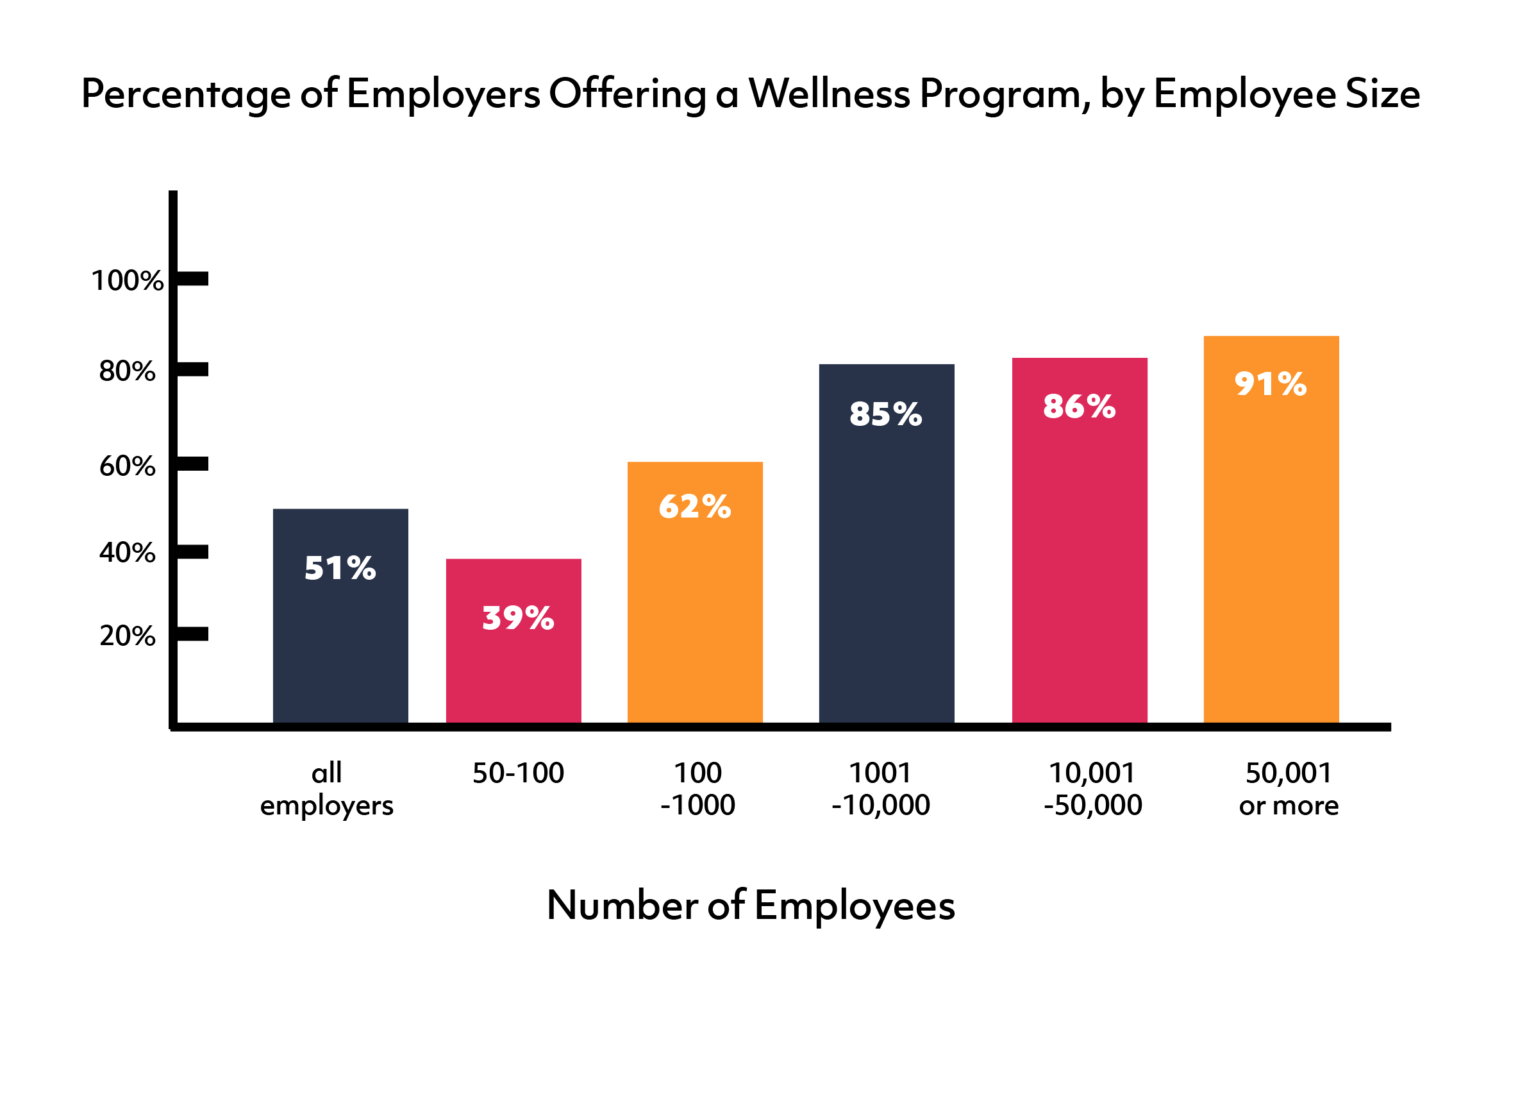 graph of percentage of employers offering wellness programs